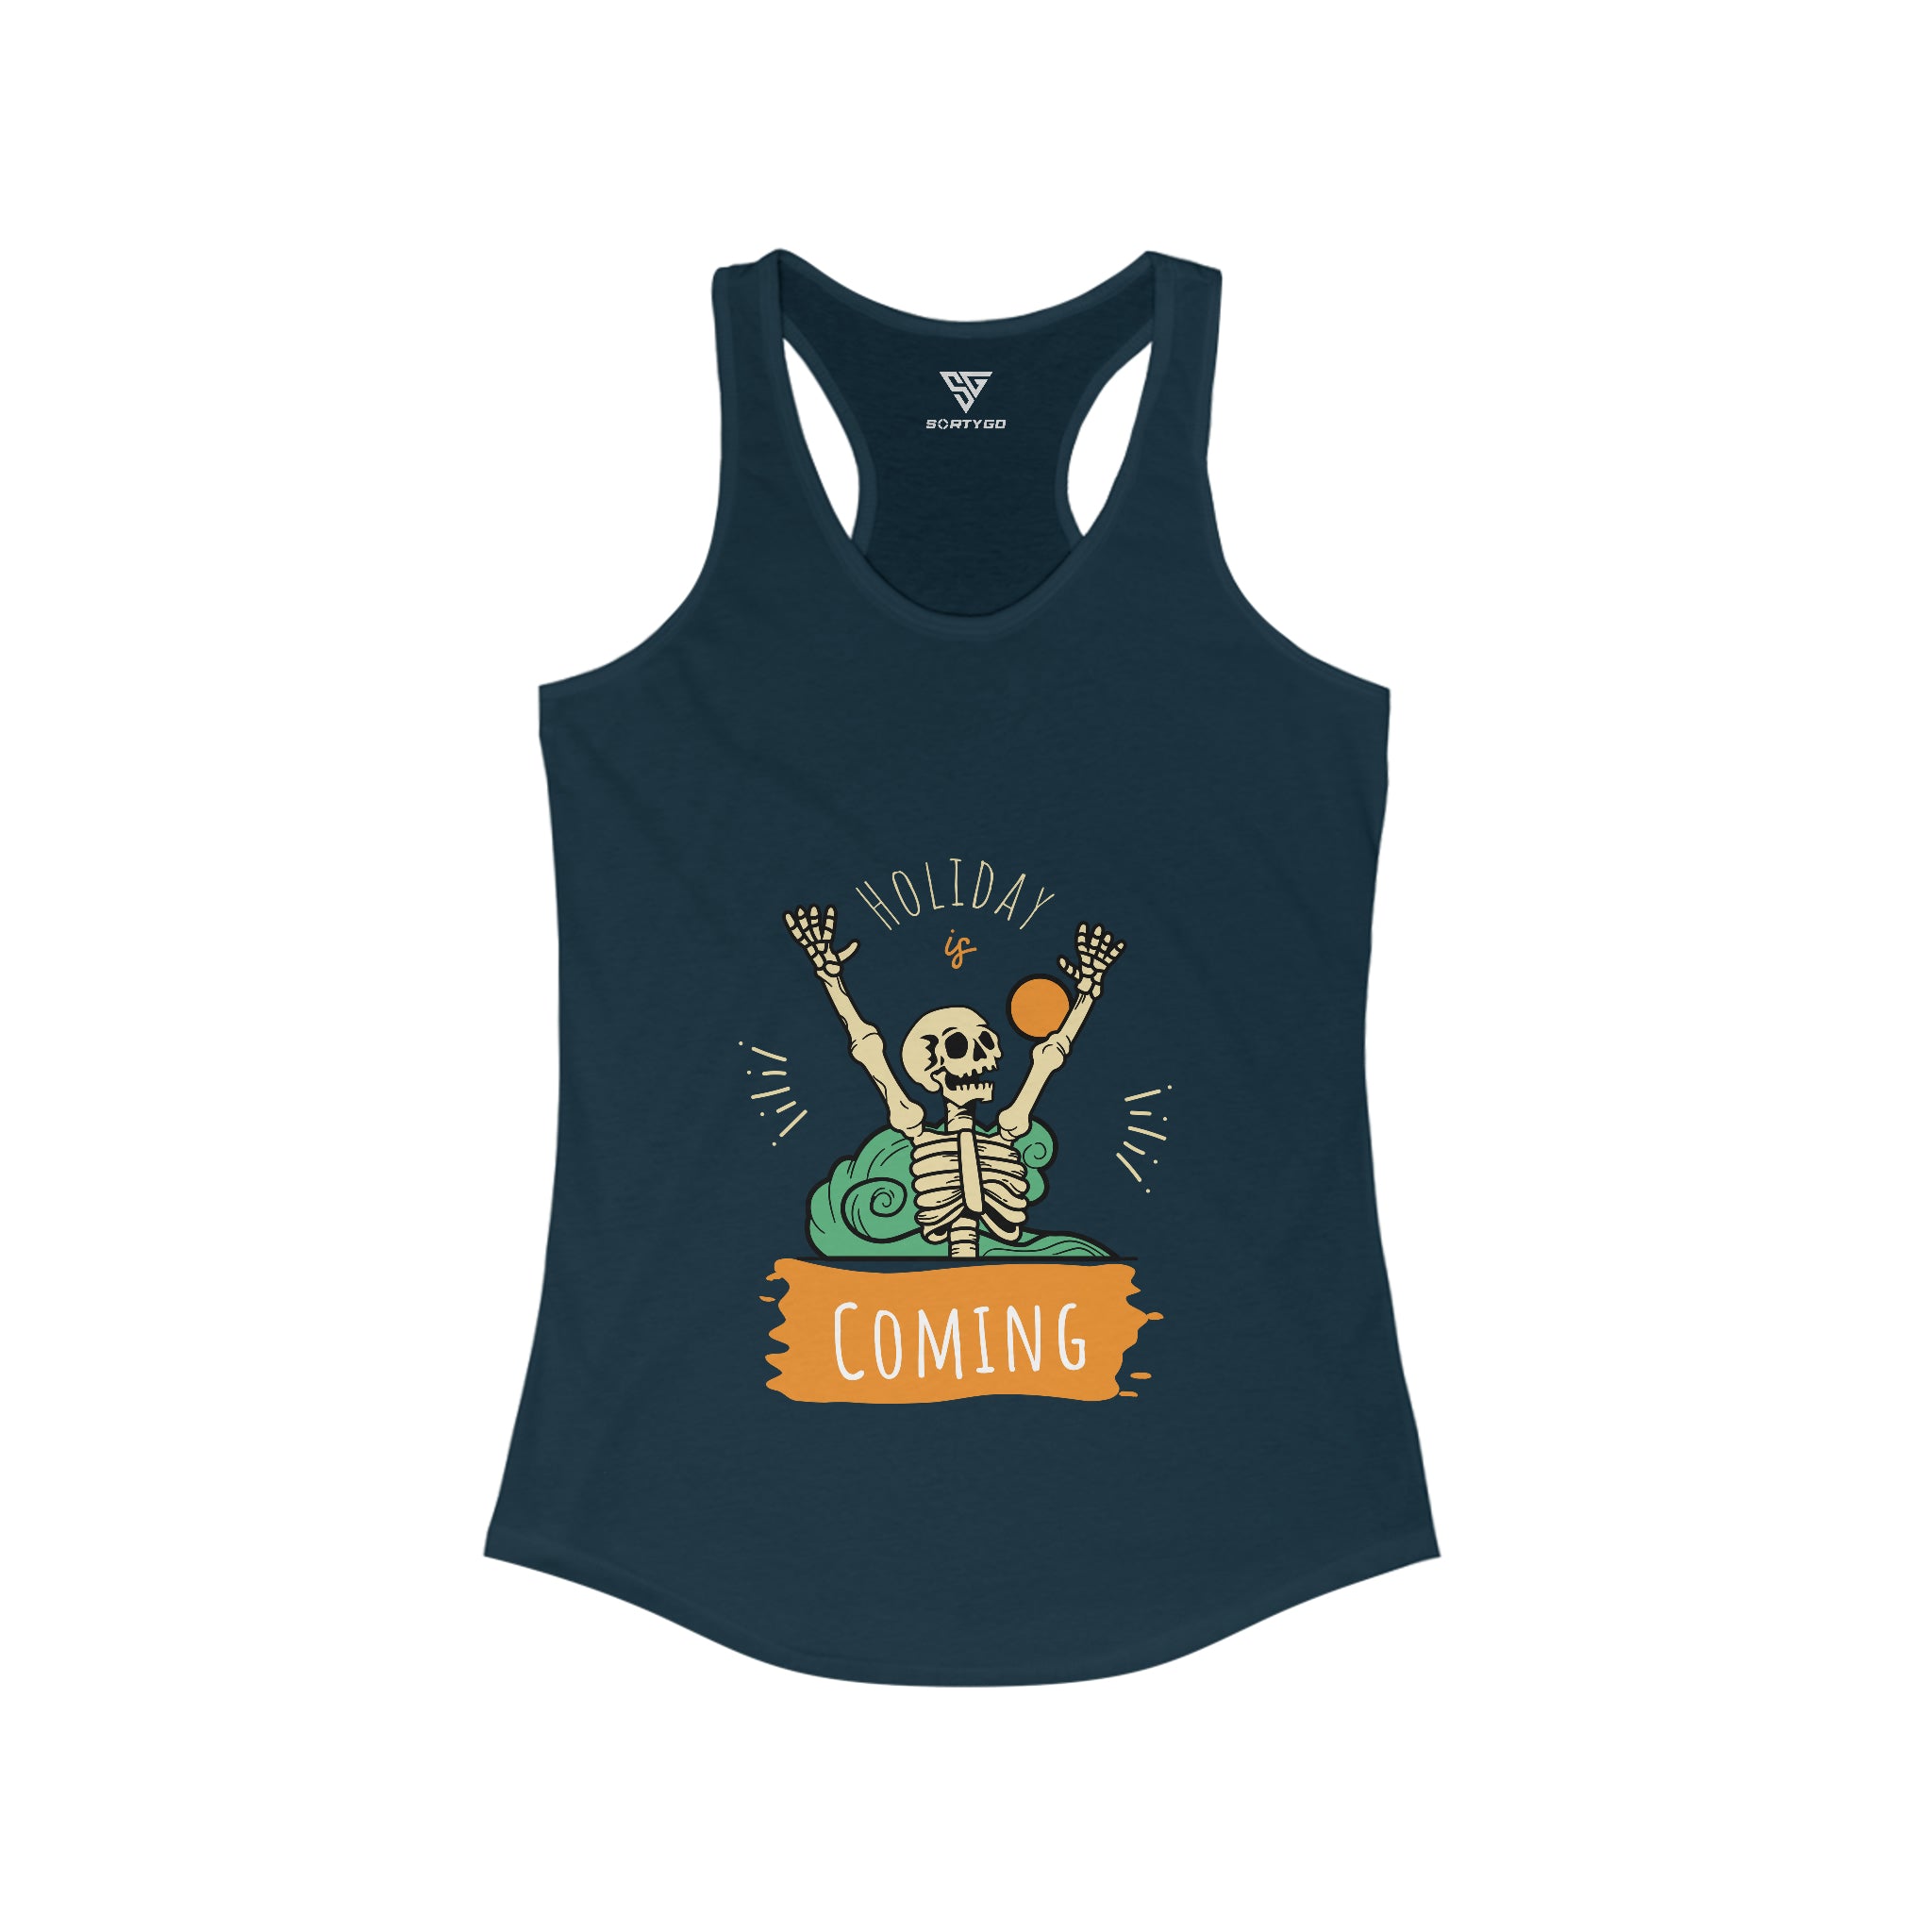 SORTYGO - Holiday is Coming Women Ideal Racerback Tank in Solid Midnight Navy